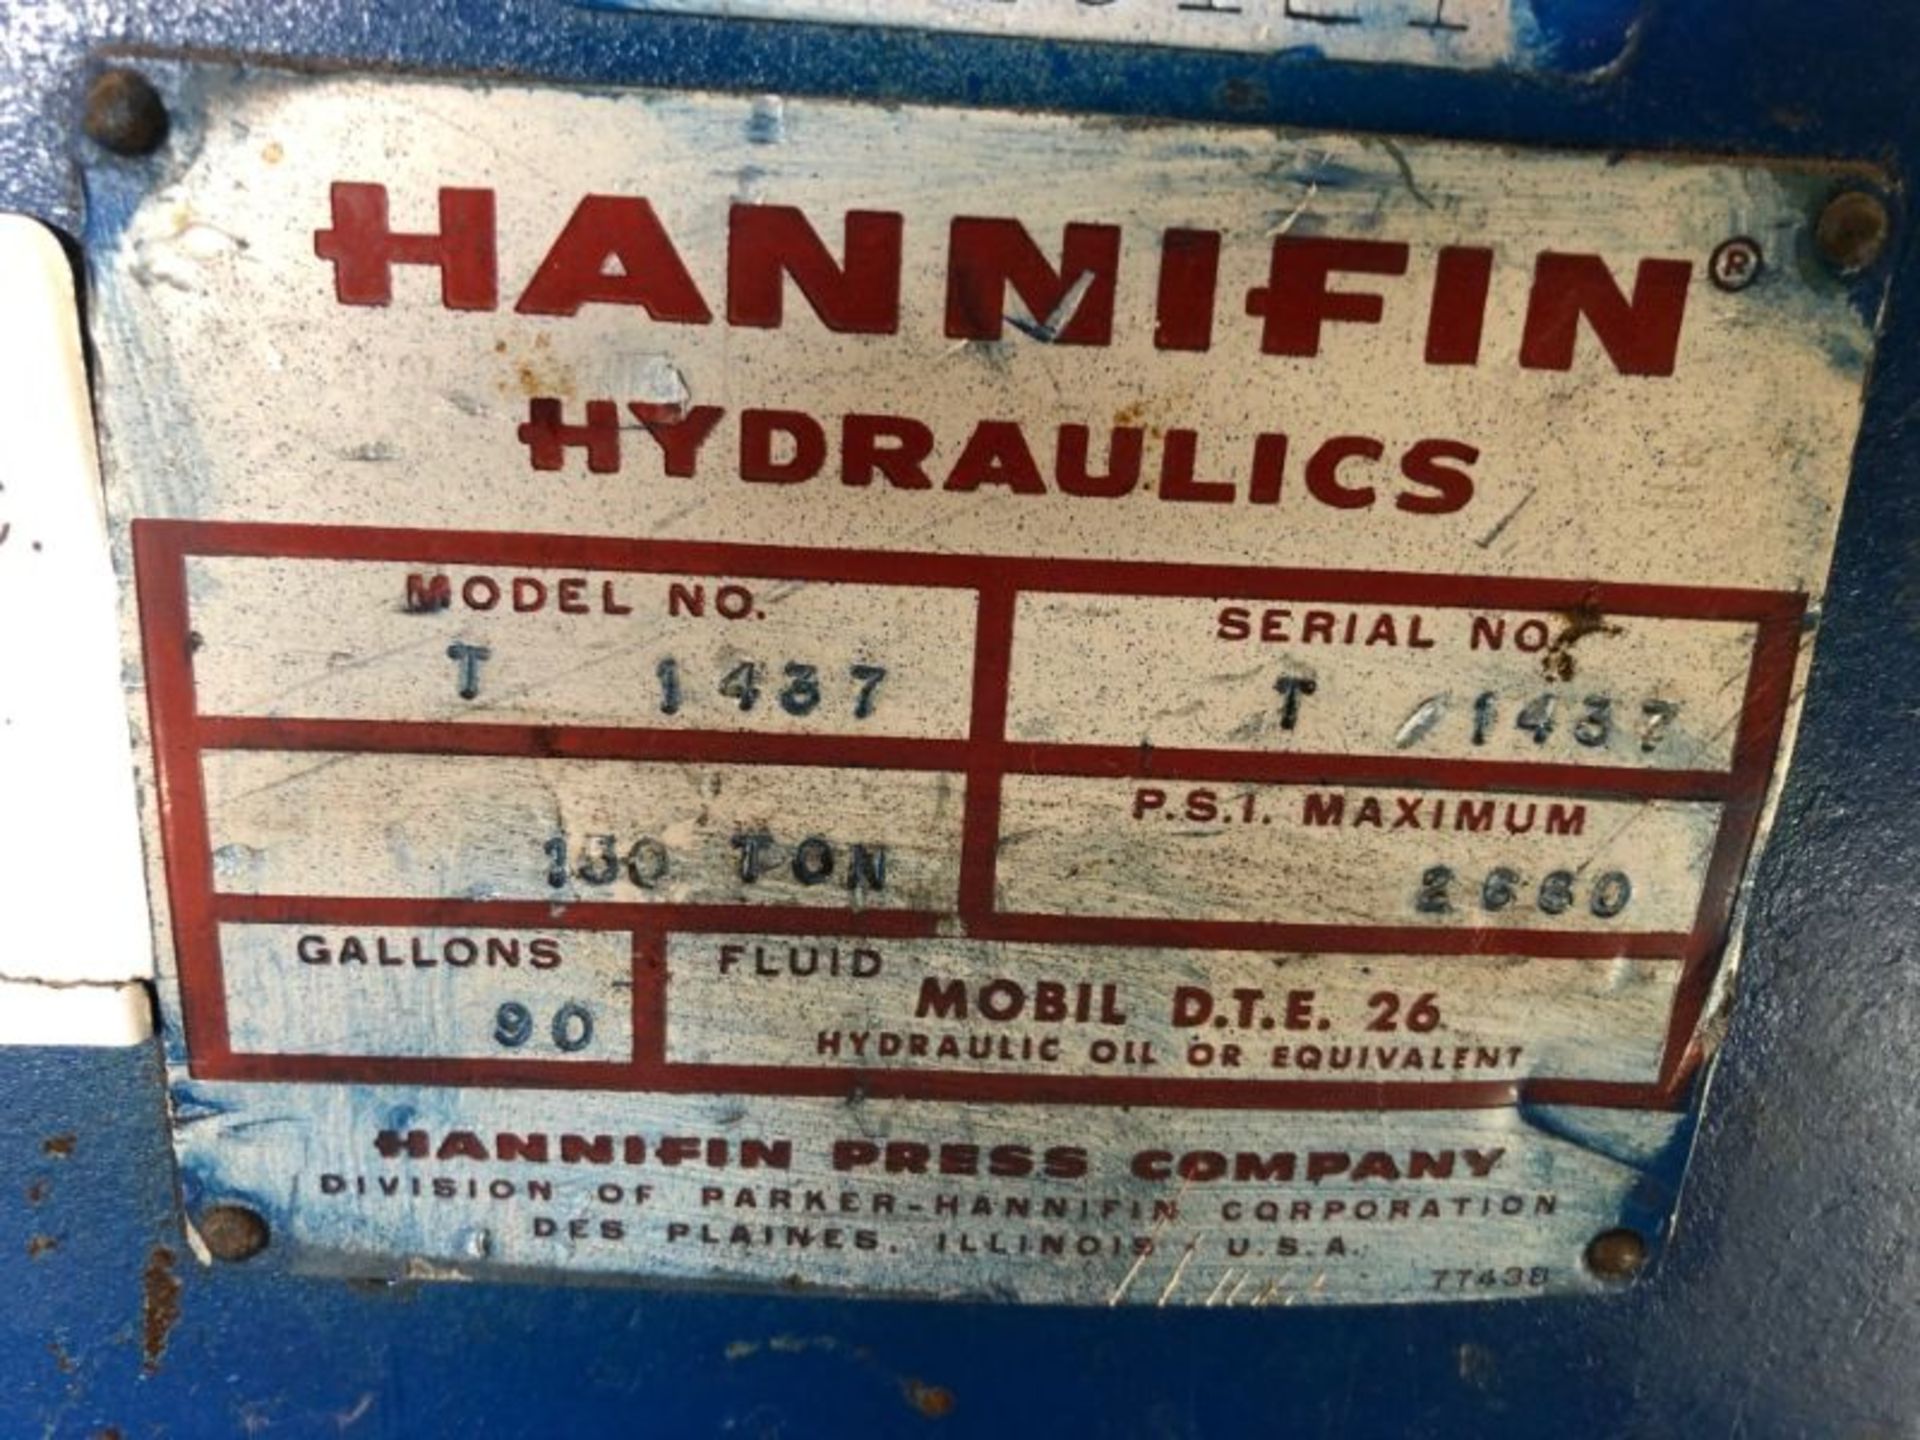 Hannifin Model T 1437 150-Ton Hydraulic Gap Frame Press, S/N T 1437; (Estimated Mid 1960s); 24" - Image 7 of 7